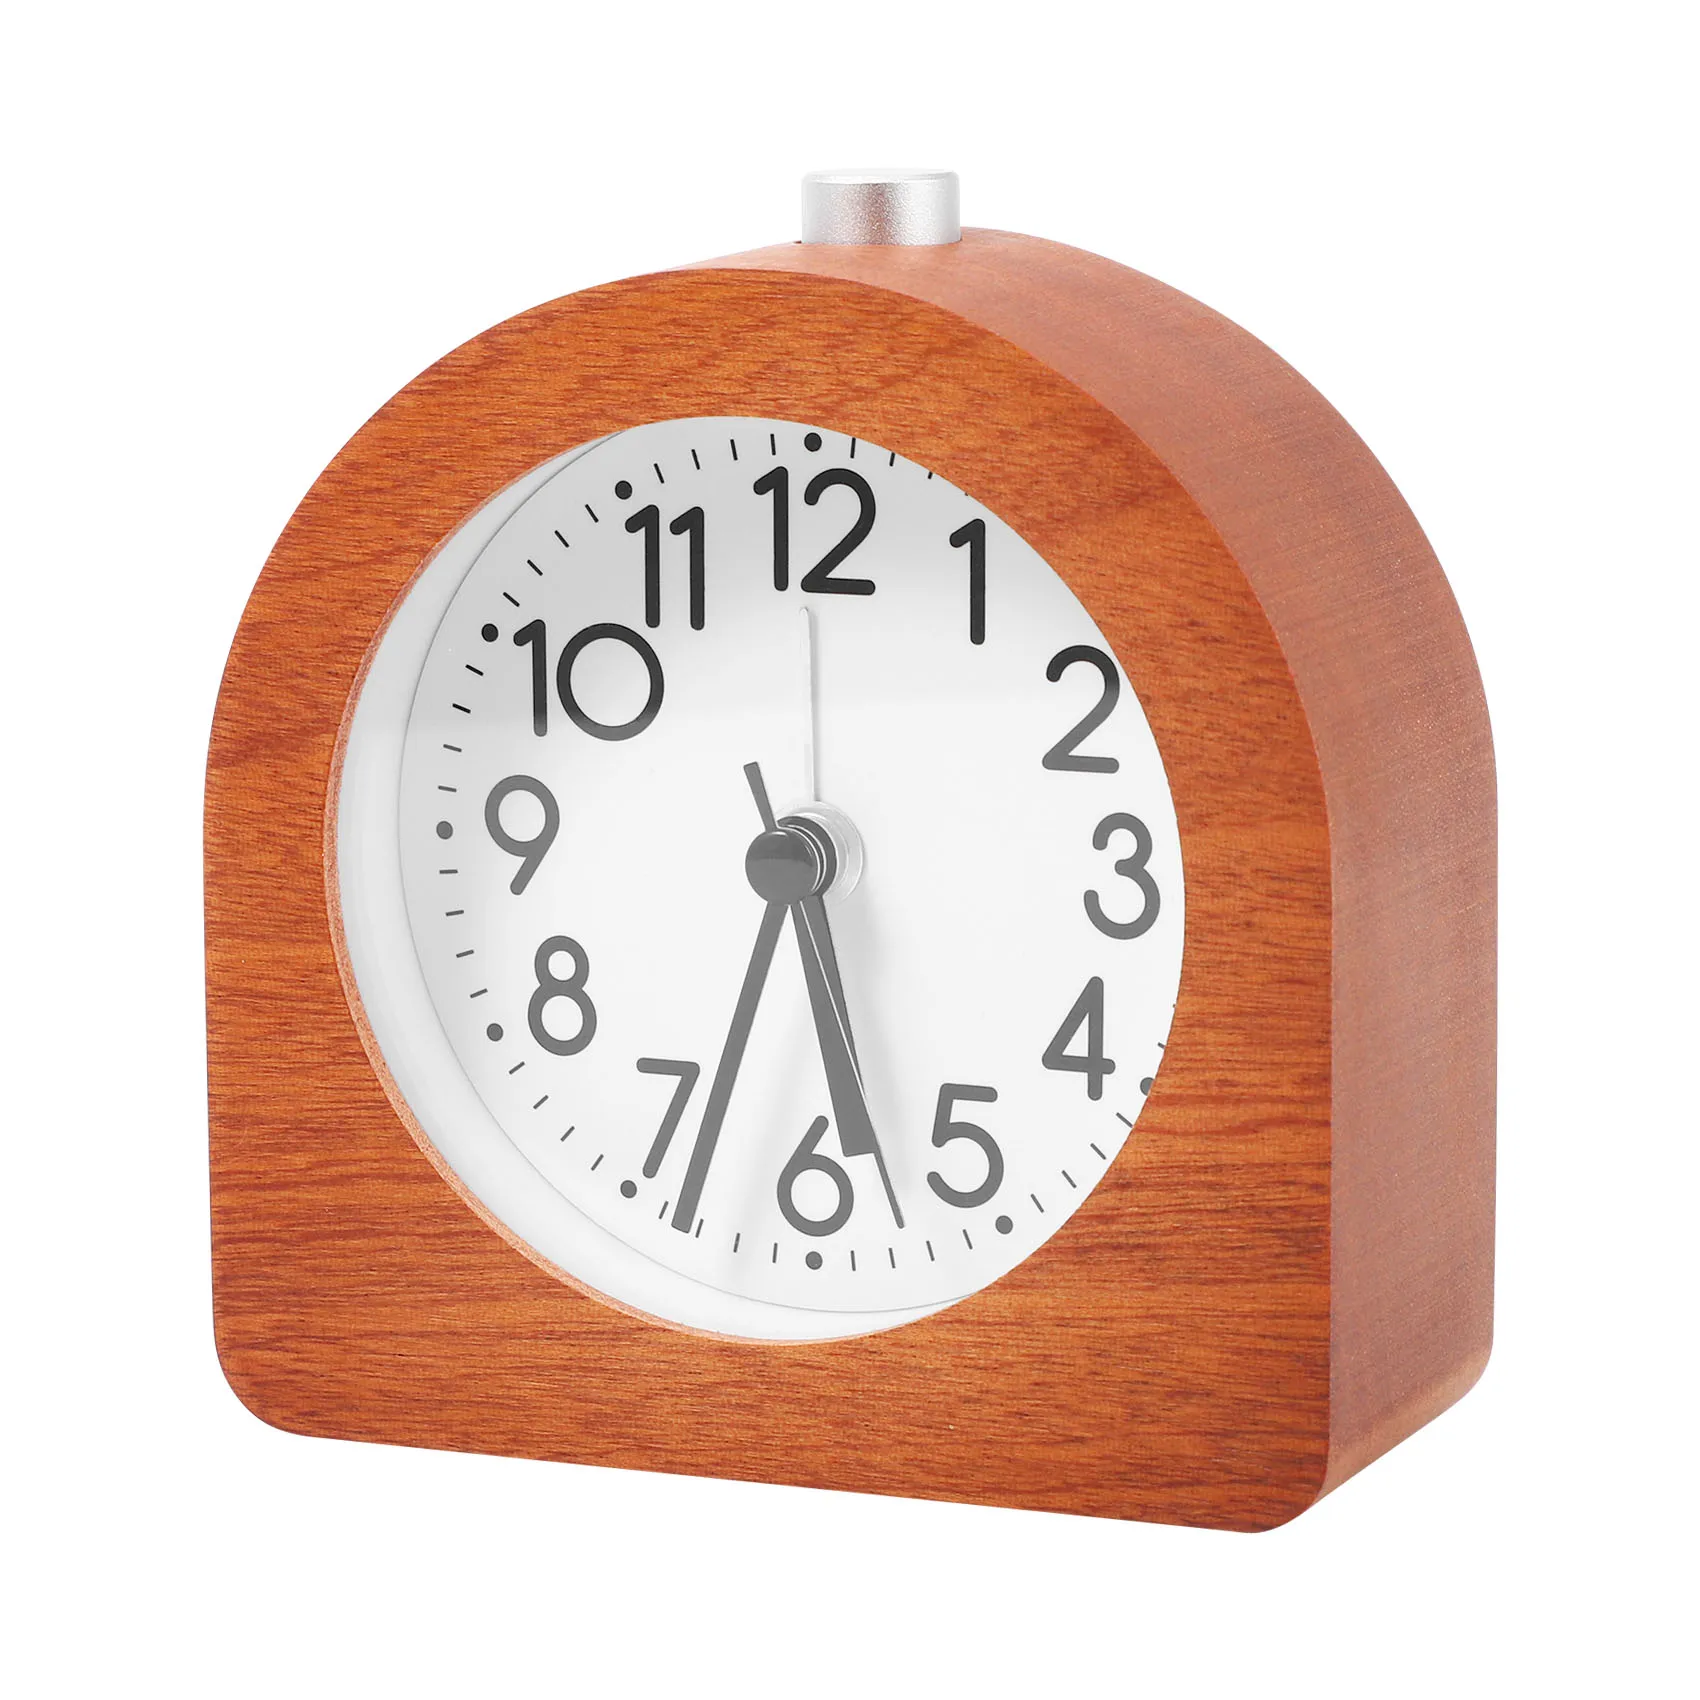 

Alarm Clock Without Ticking Retro Wooden Alarm Clock with Dial Alarm Light Quiet Table Clock with Snooze Function A